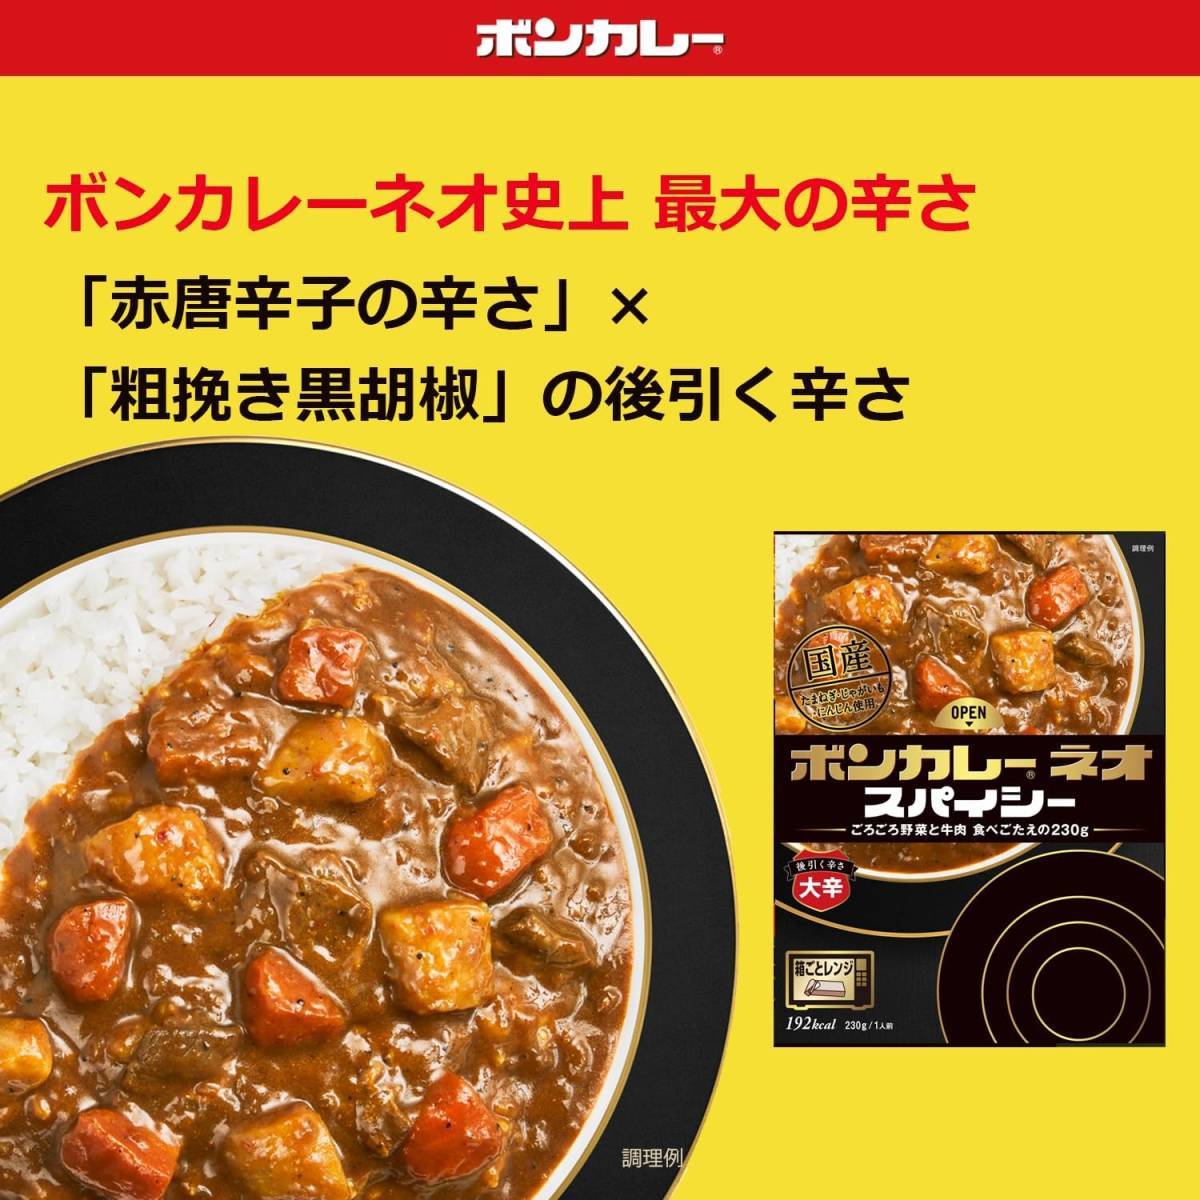  large .230g ×5 piece large . food bon curry Neo Spy si- after .... large .230g ×5 piece 